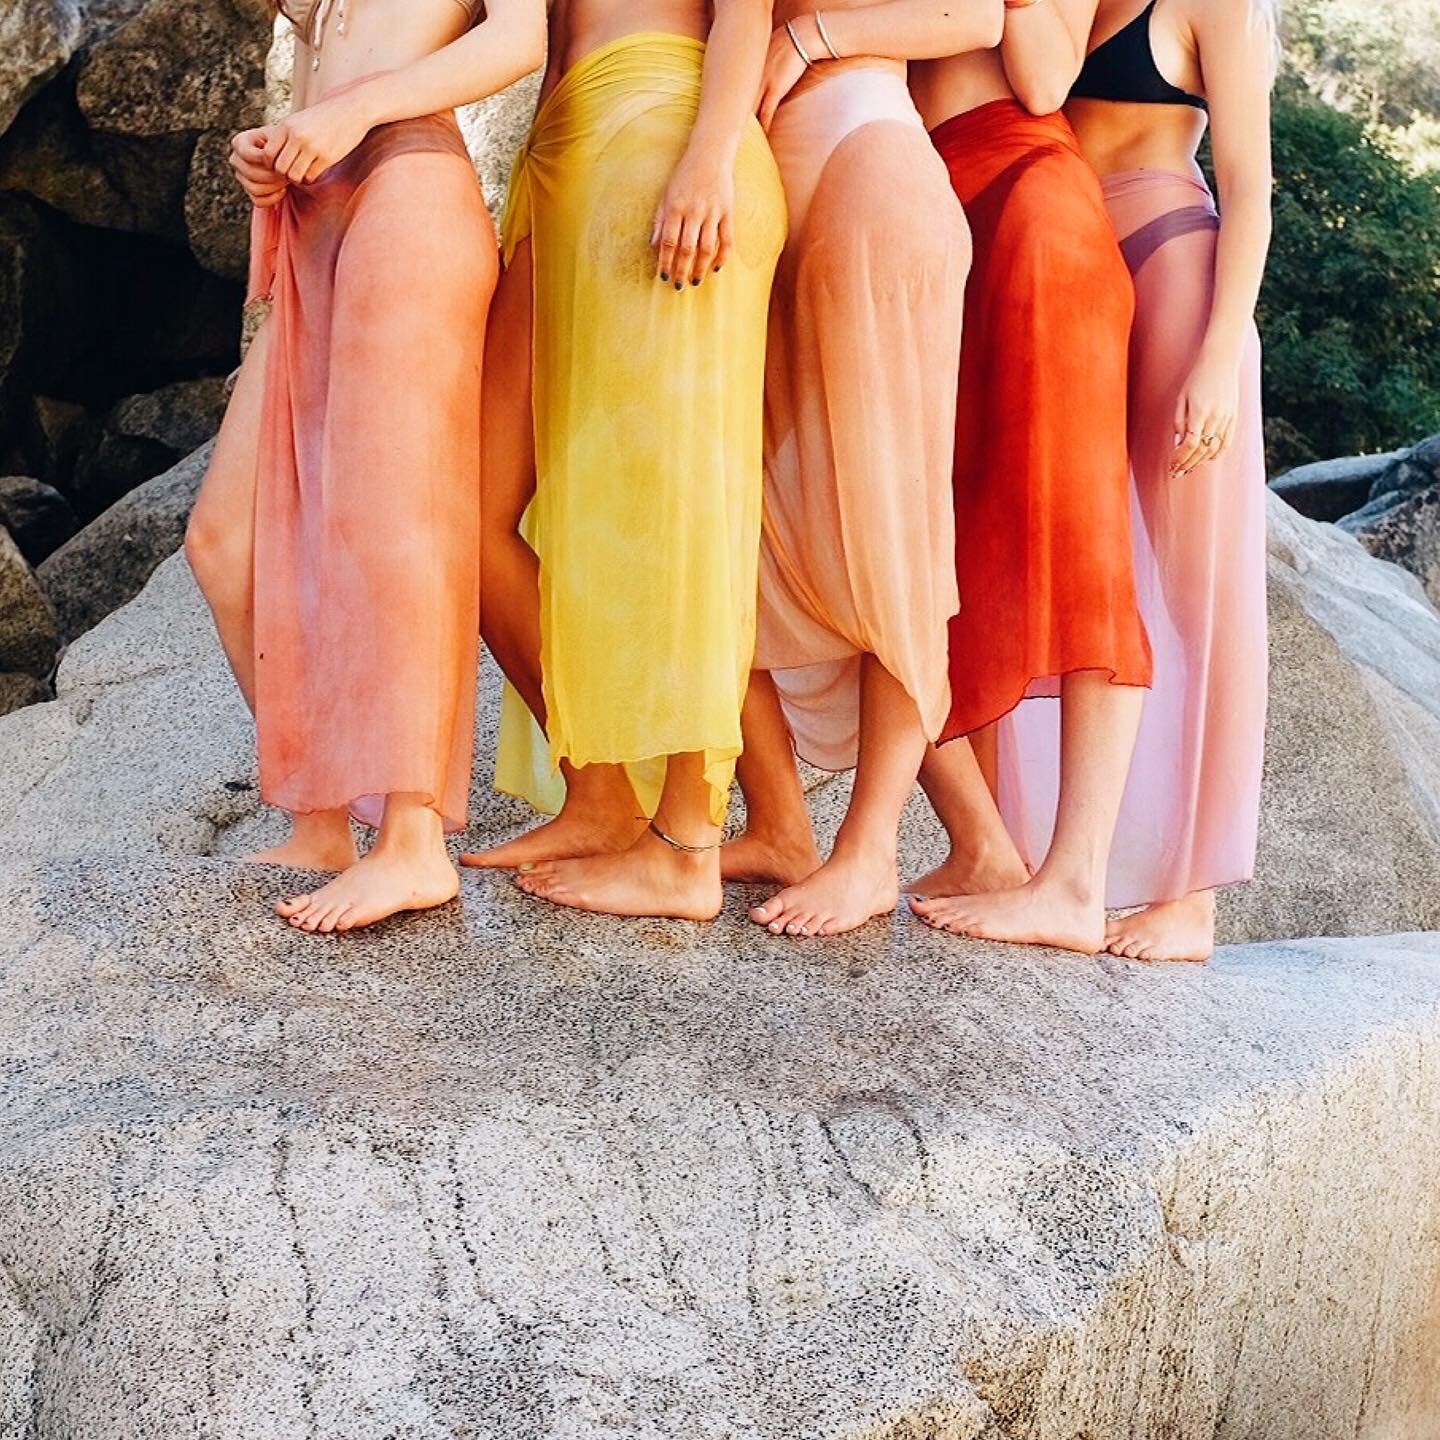 Chiffon Sarongs✨ on Yuba beauties ✨ available in the shop 🙌 the website is in the process of an update and Instagram isn&rsquo;t letting me tag products on the new site, but you can follow the link on my home page and have a look 😍 this photo and t